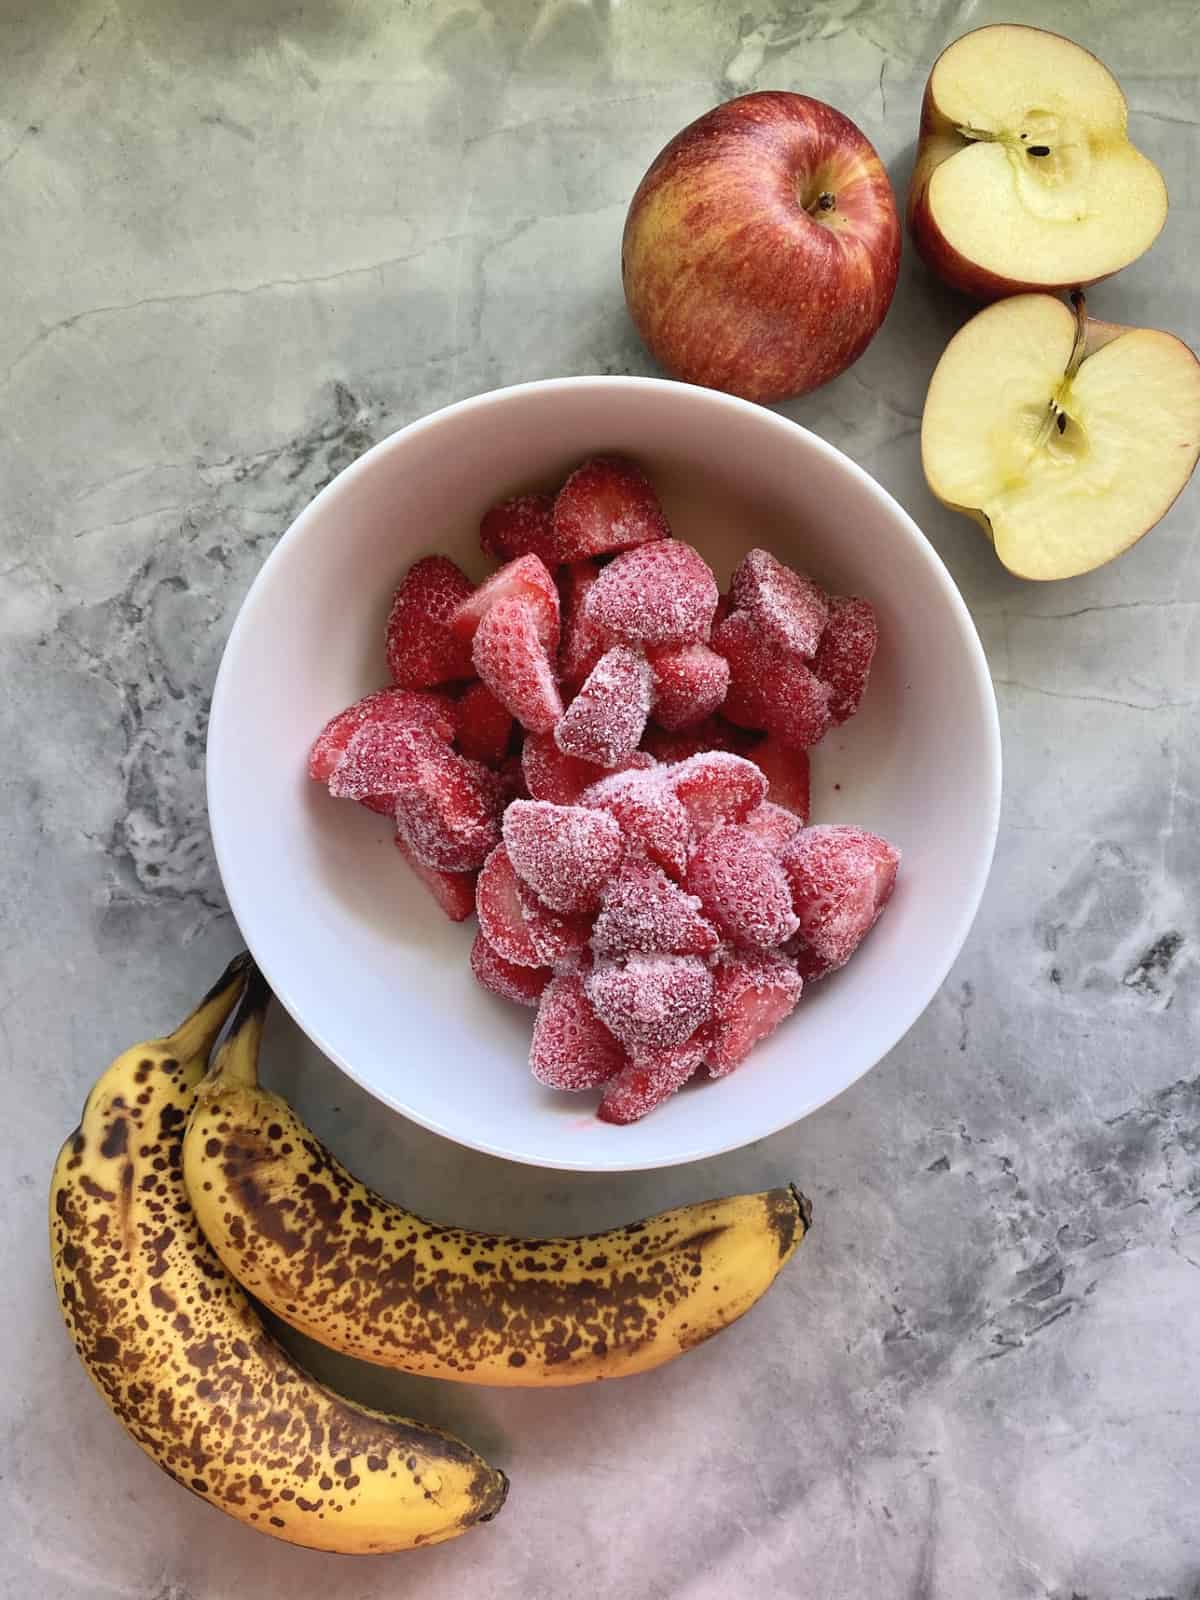 Over ripe bananas, frozen strawberries, cut apples on a marble countertop.